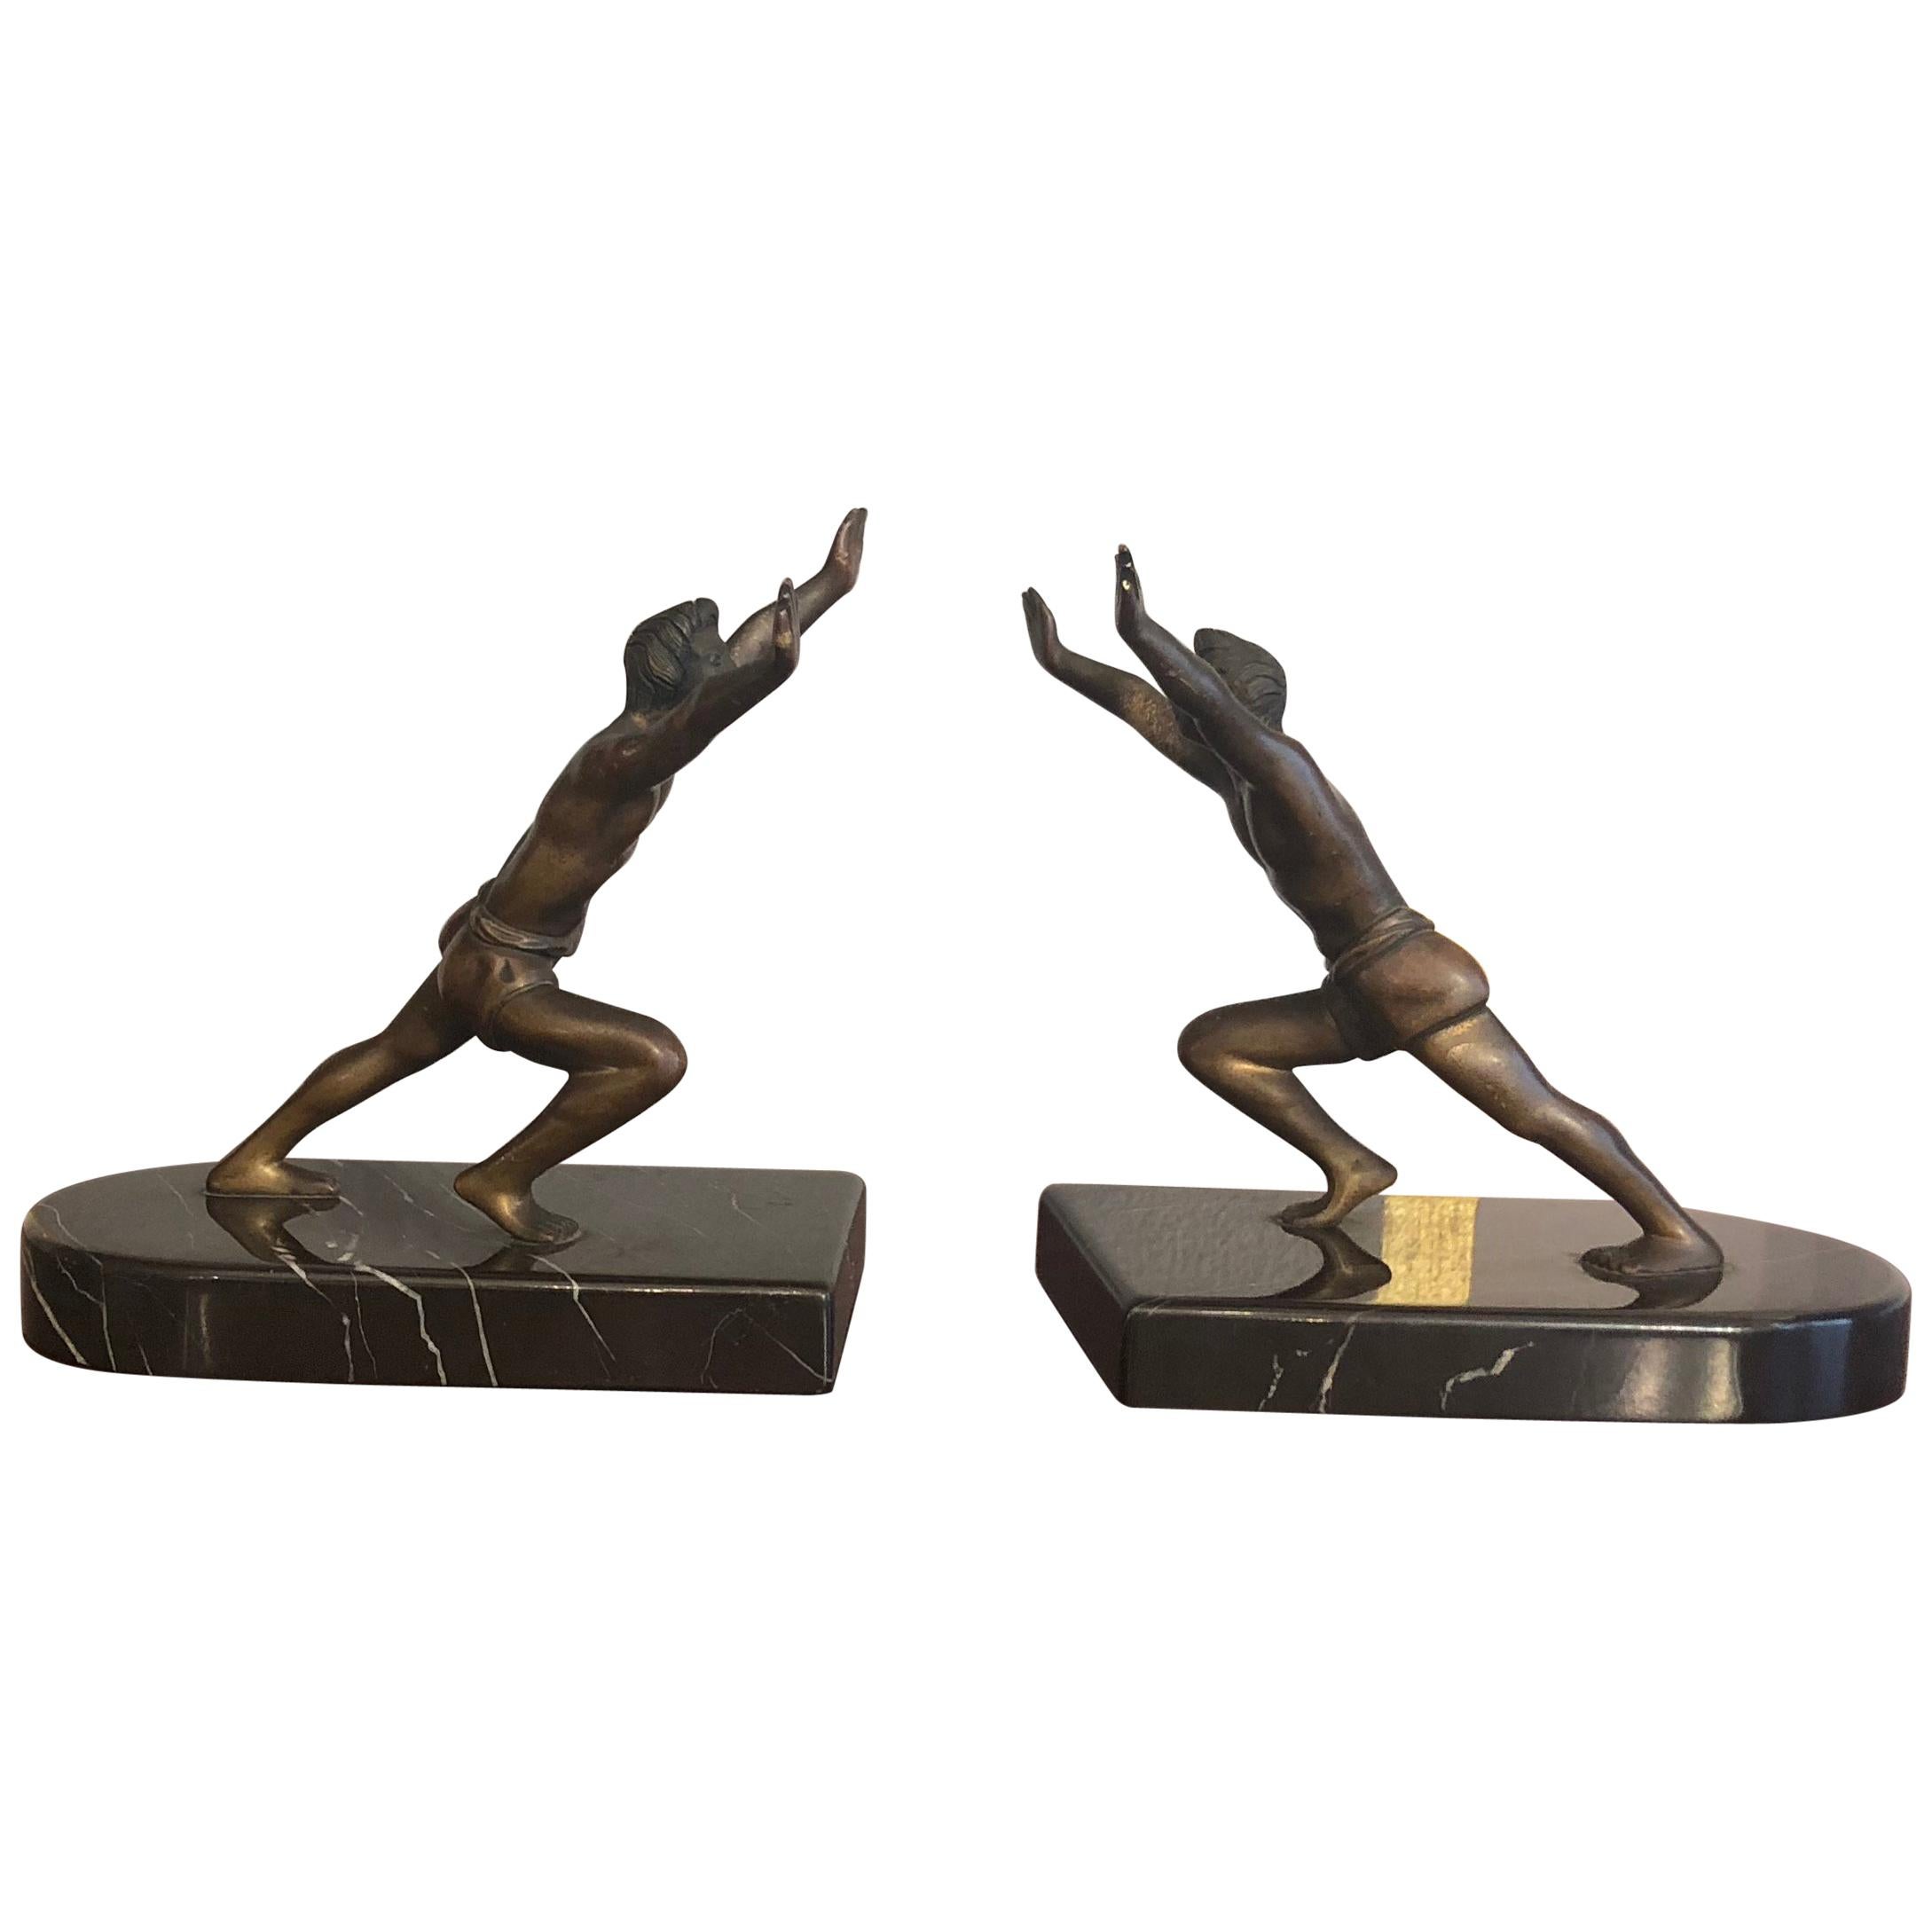 Art Deco bronze book holders with marble bases. Very detailed and finely made little bronze sculptures.
Size of each:
High 13 cm
wide 15 cm
deep 10 cm
Ideal as Christmas or wedding present.

 